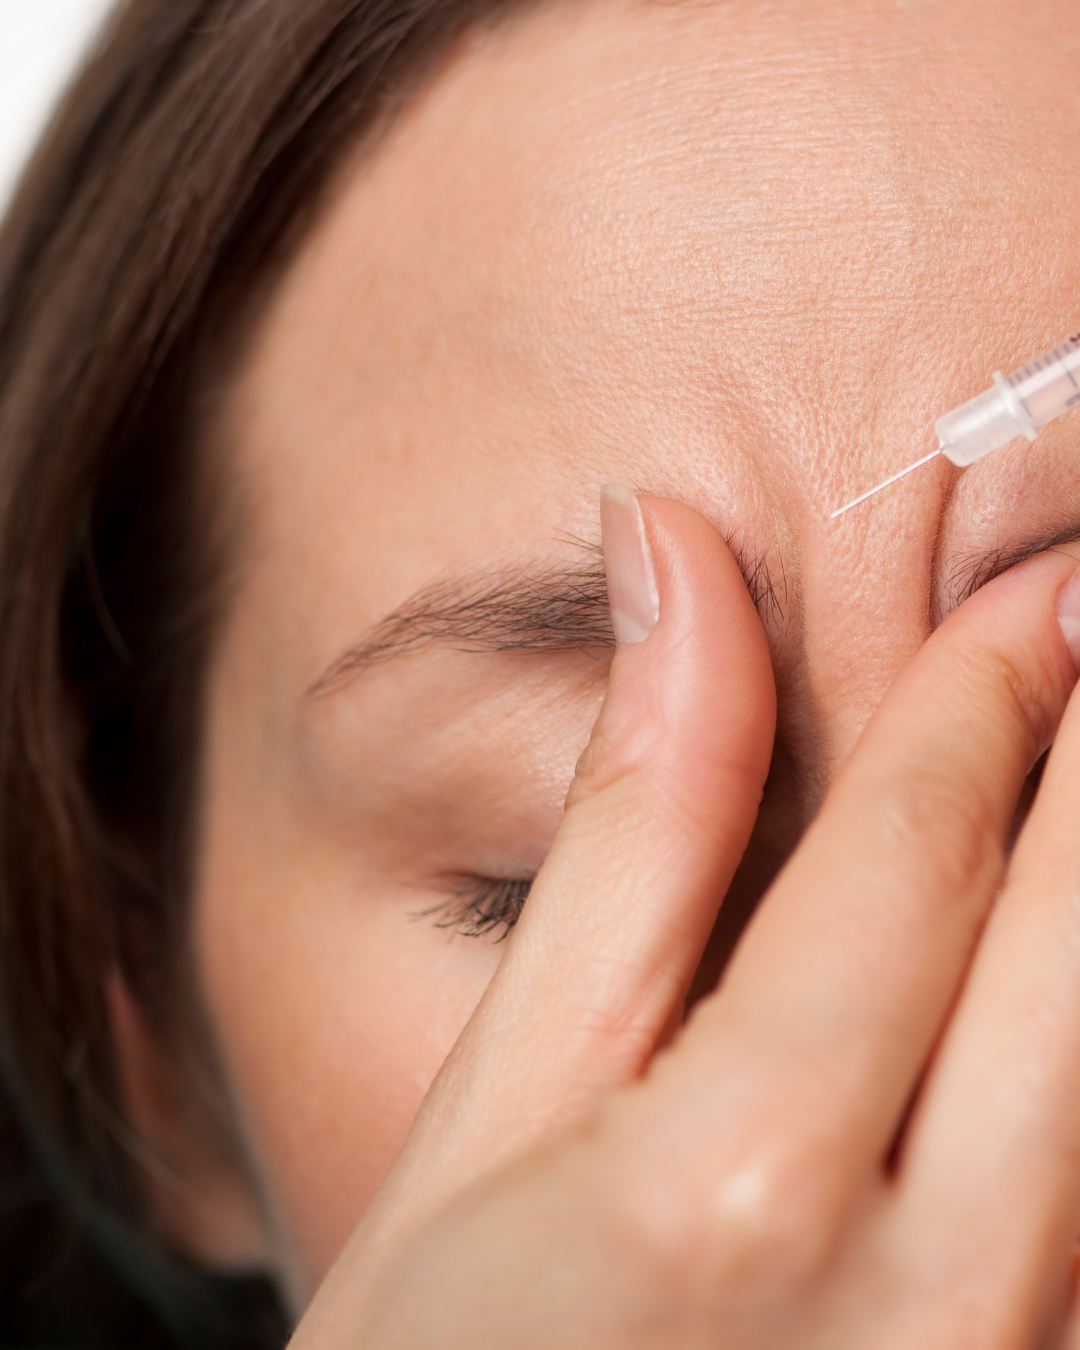 Dysport vs Botox: What is the difference, and which is better?